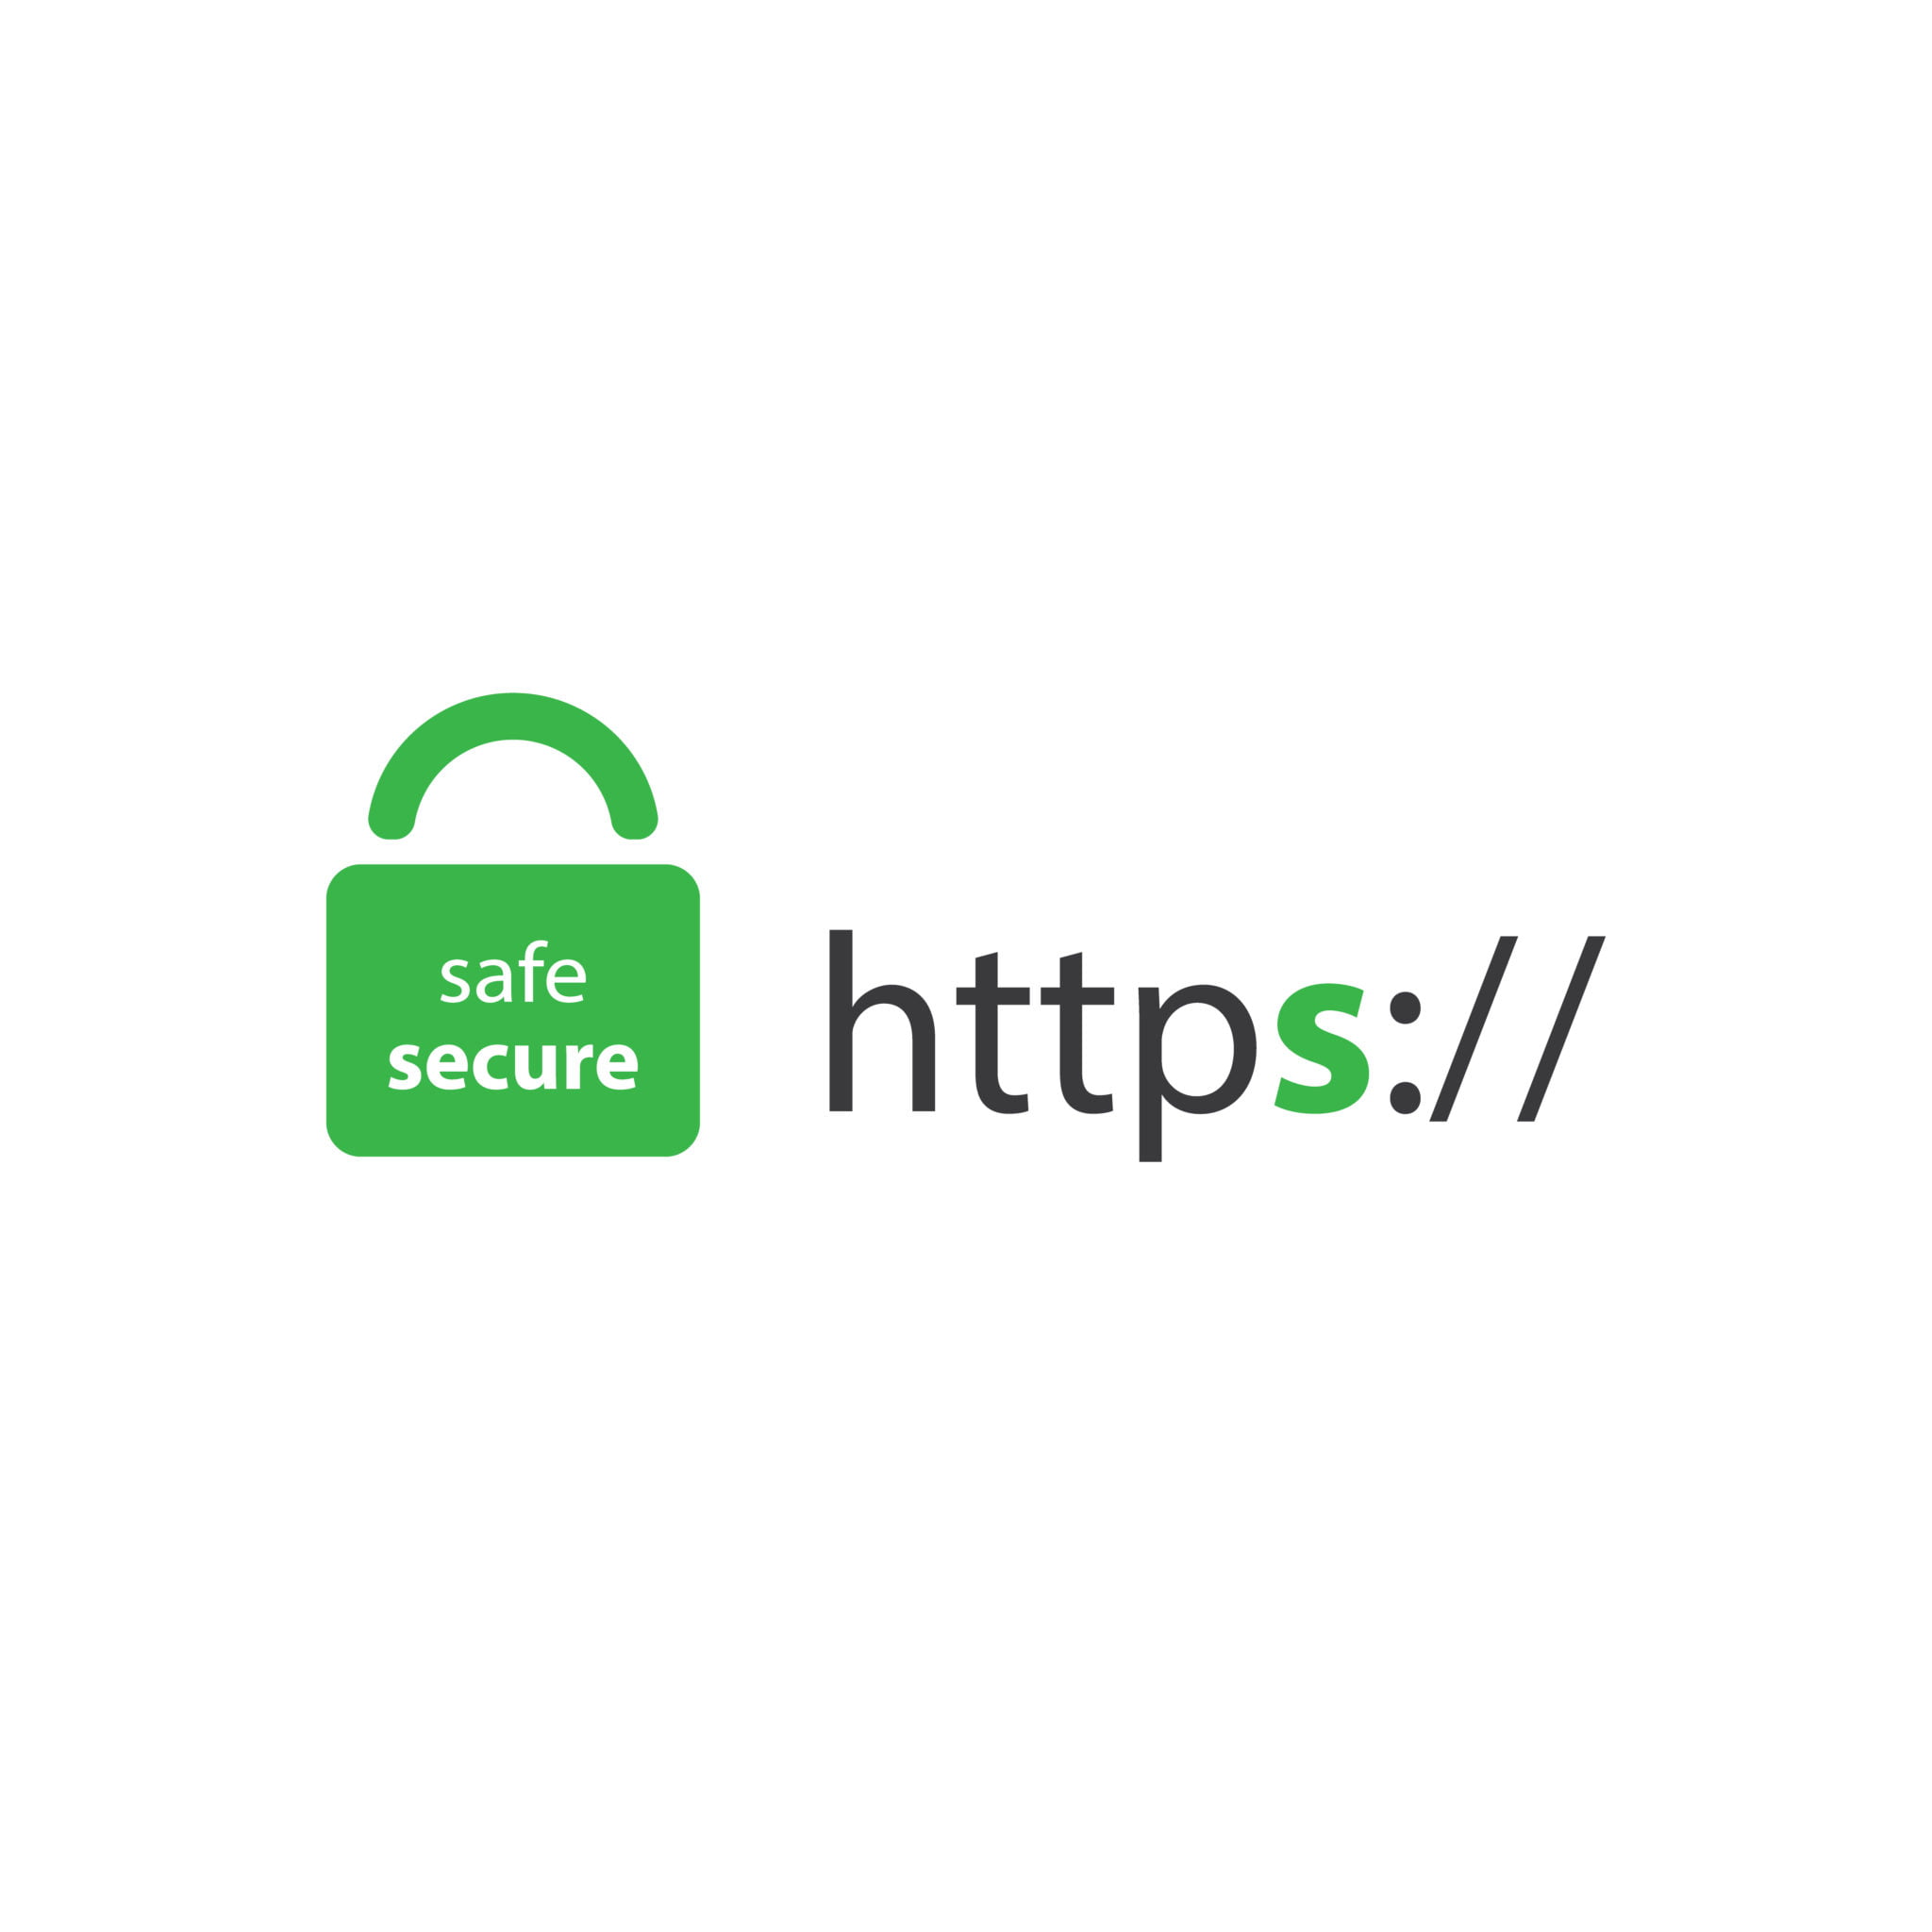 Should you switch to https?